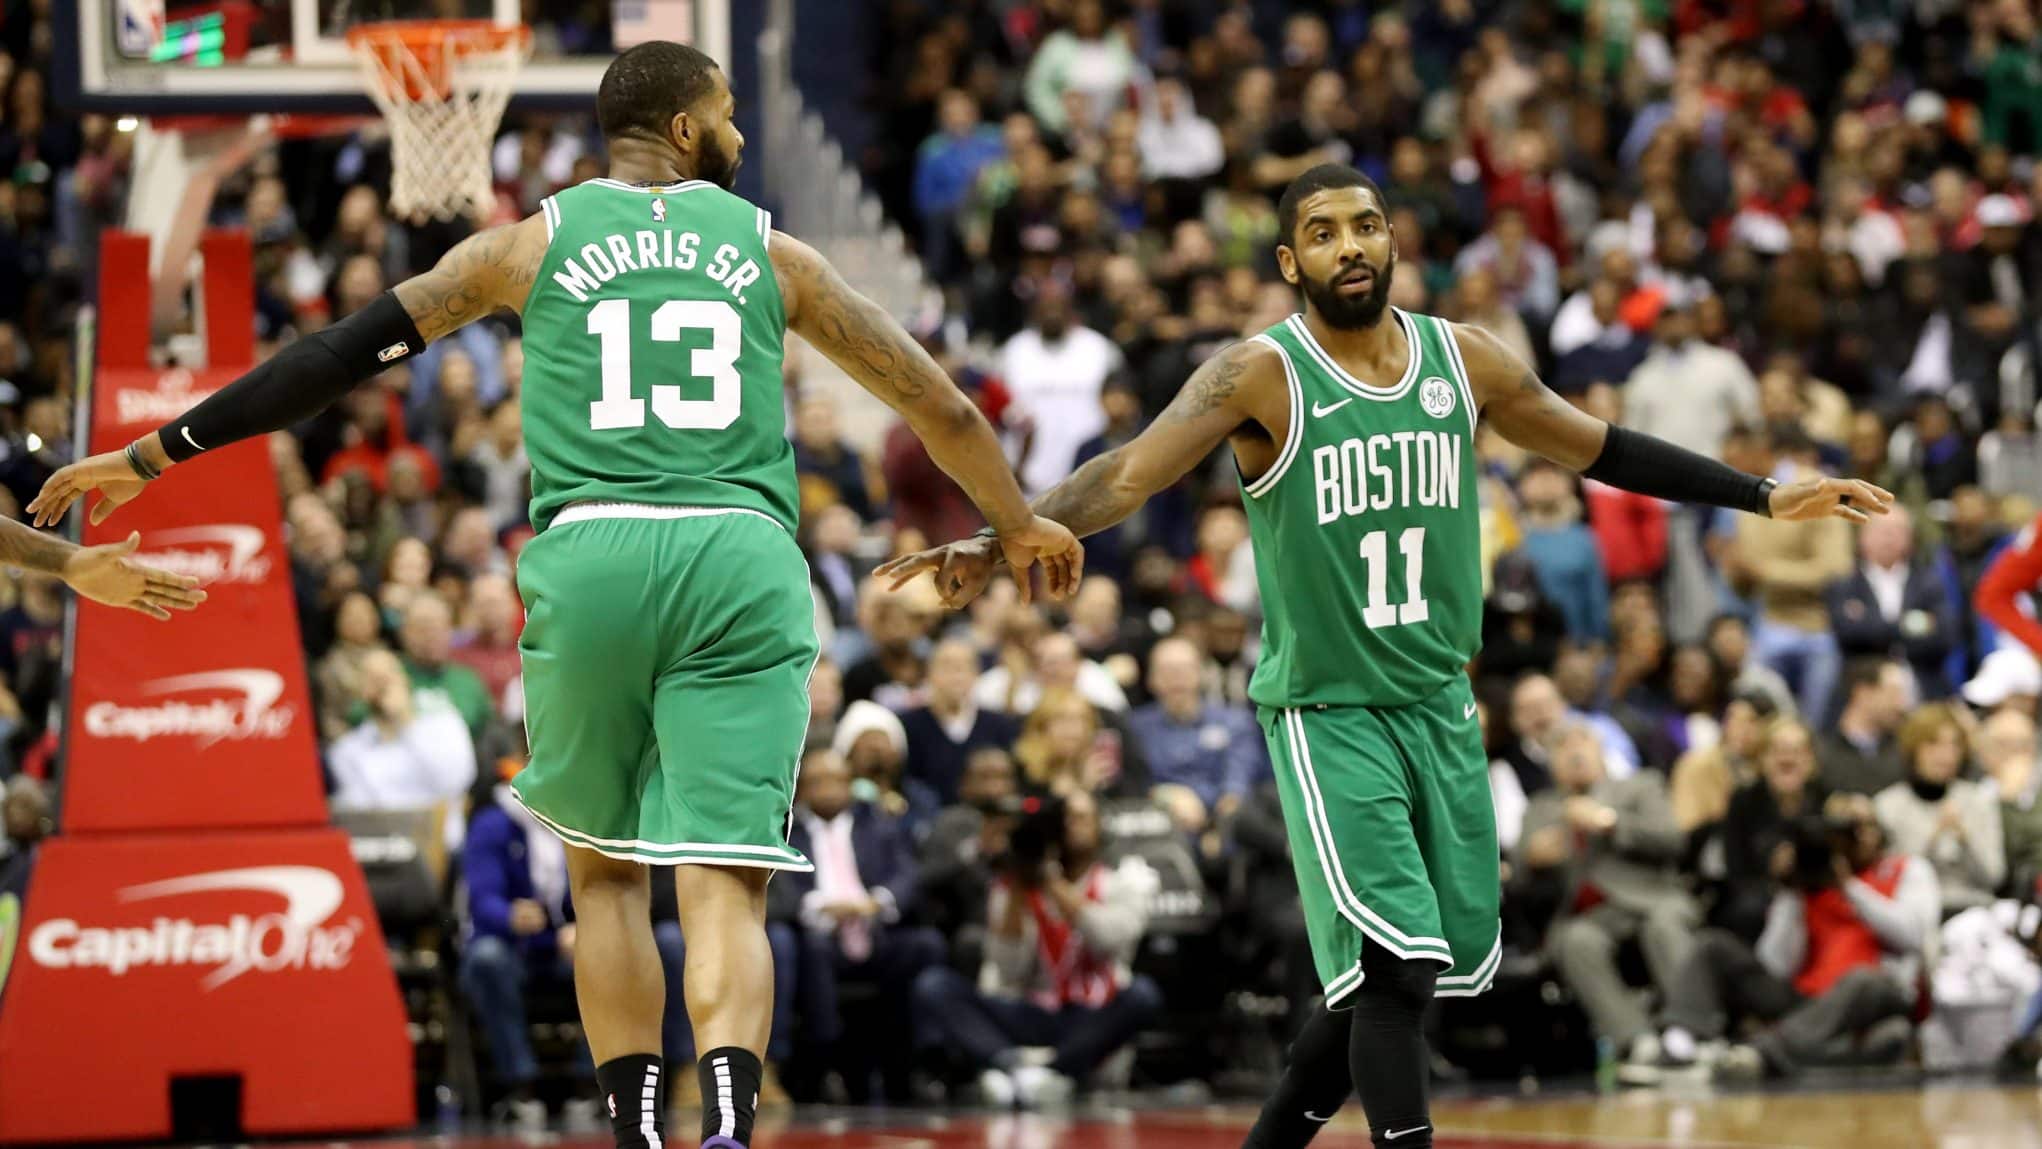 Marcus Morris, Kyrie Irving